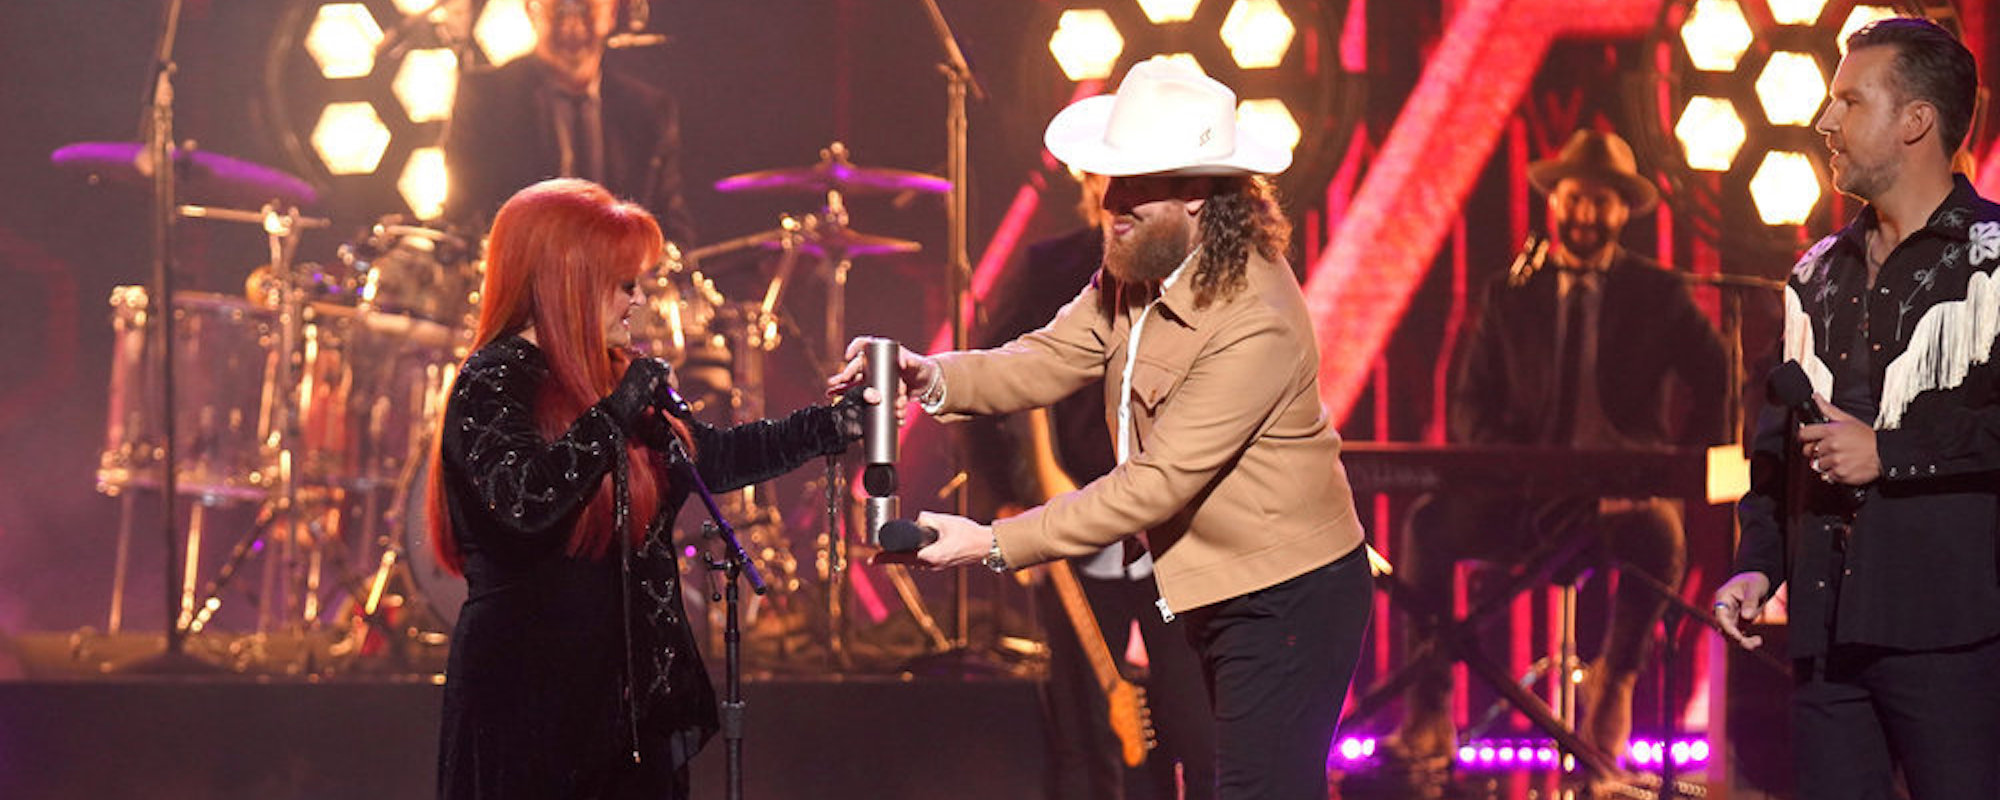 WATCH: Wynonna Judd Reflects on Moving Forward After Her Mother’s Death In Moving  People’s Choice Country Awards Speech